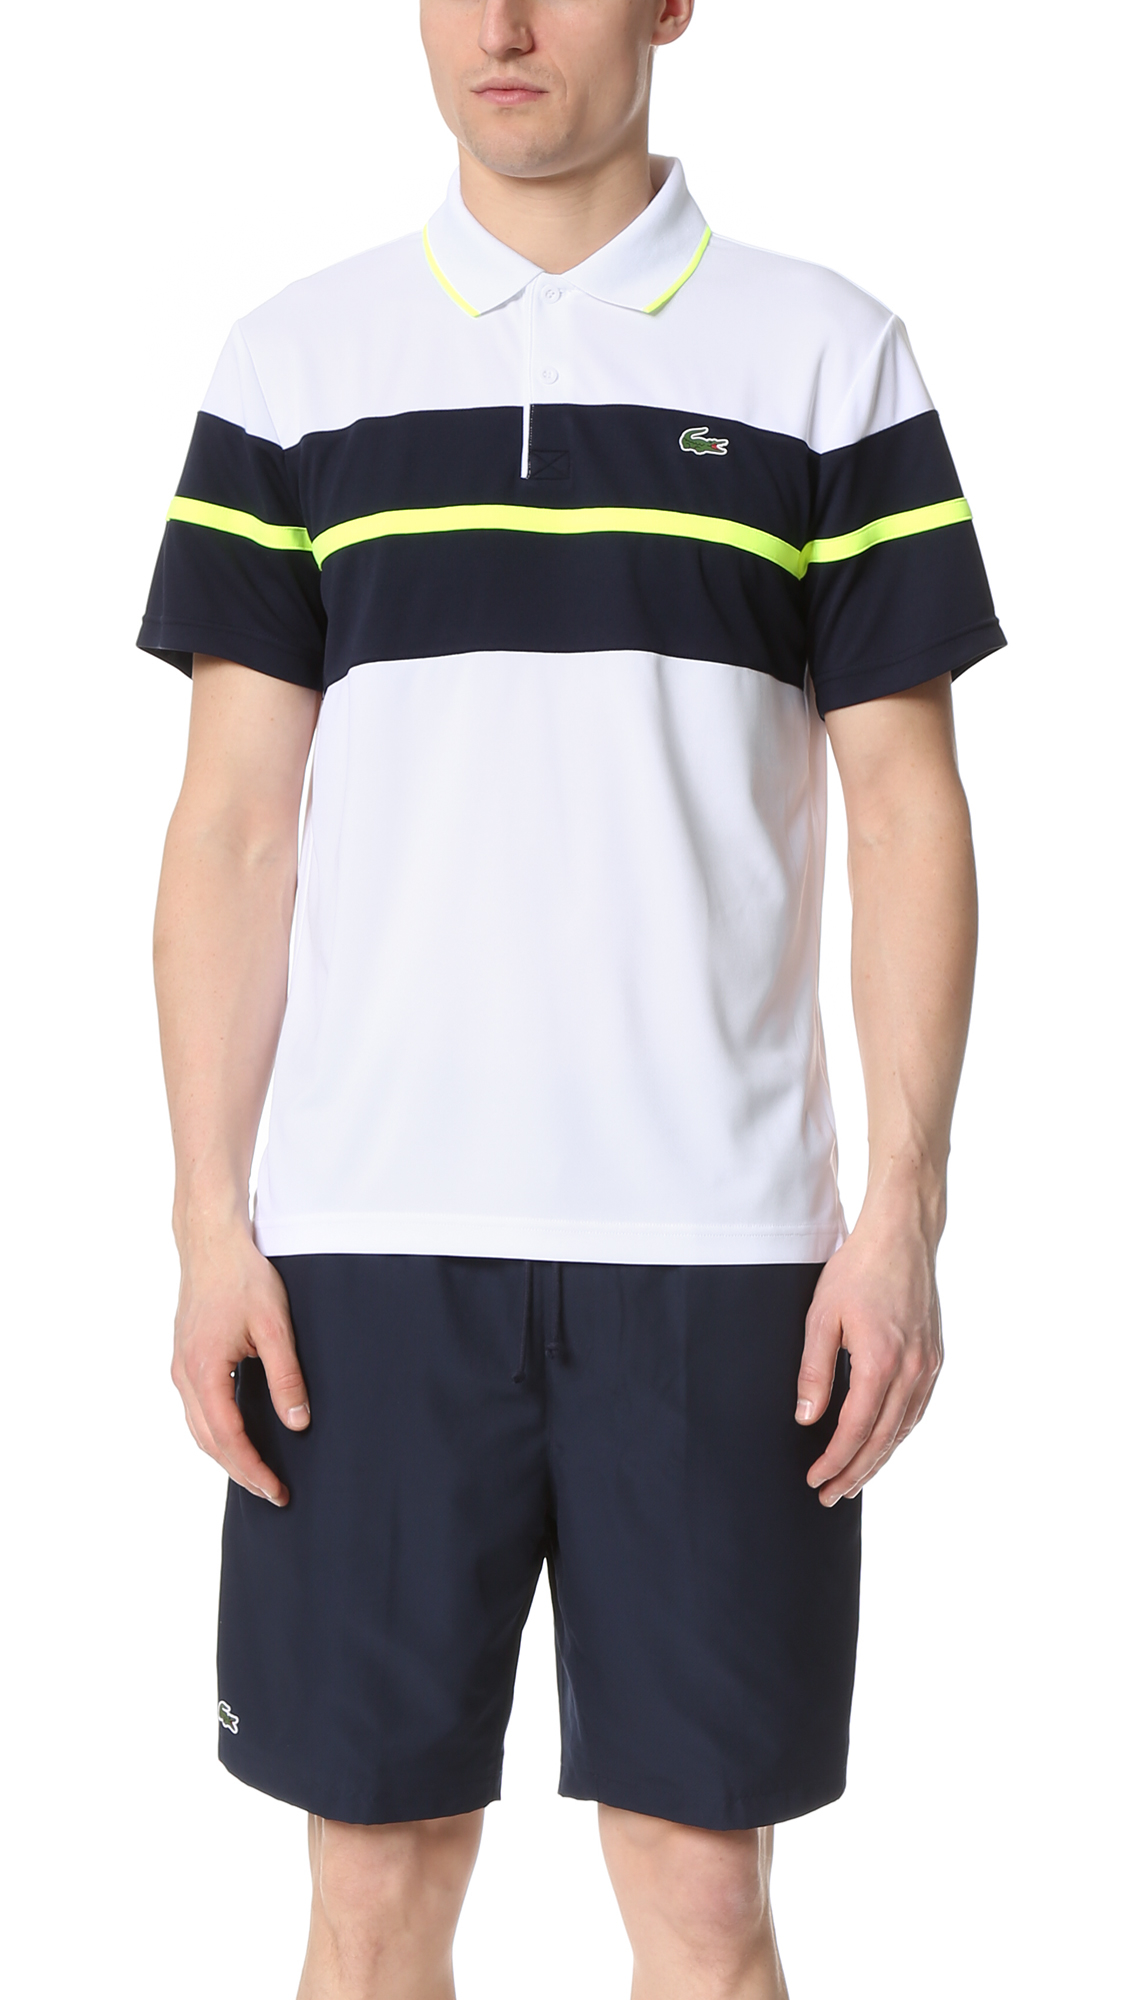 lacoste t shirt and shorts